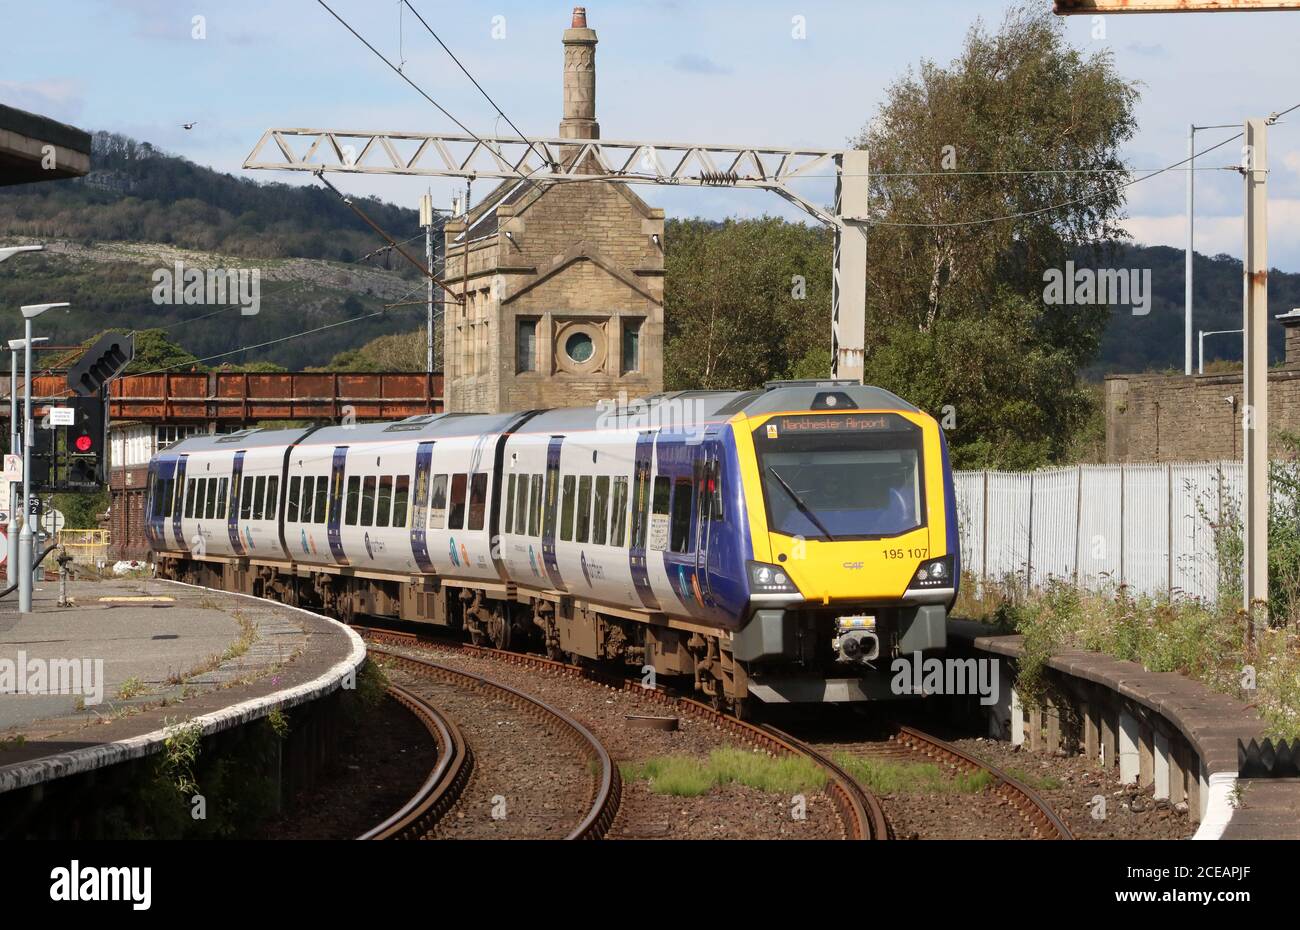 Northern trains class 195 civity diesel multiple-unit arriving at Carnforth railway station platform 1 on Monday 31st August 2020. Stock Photo